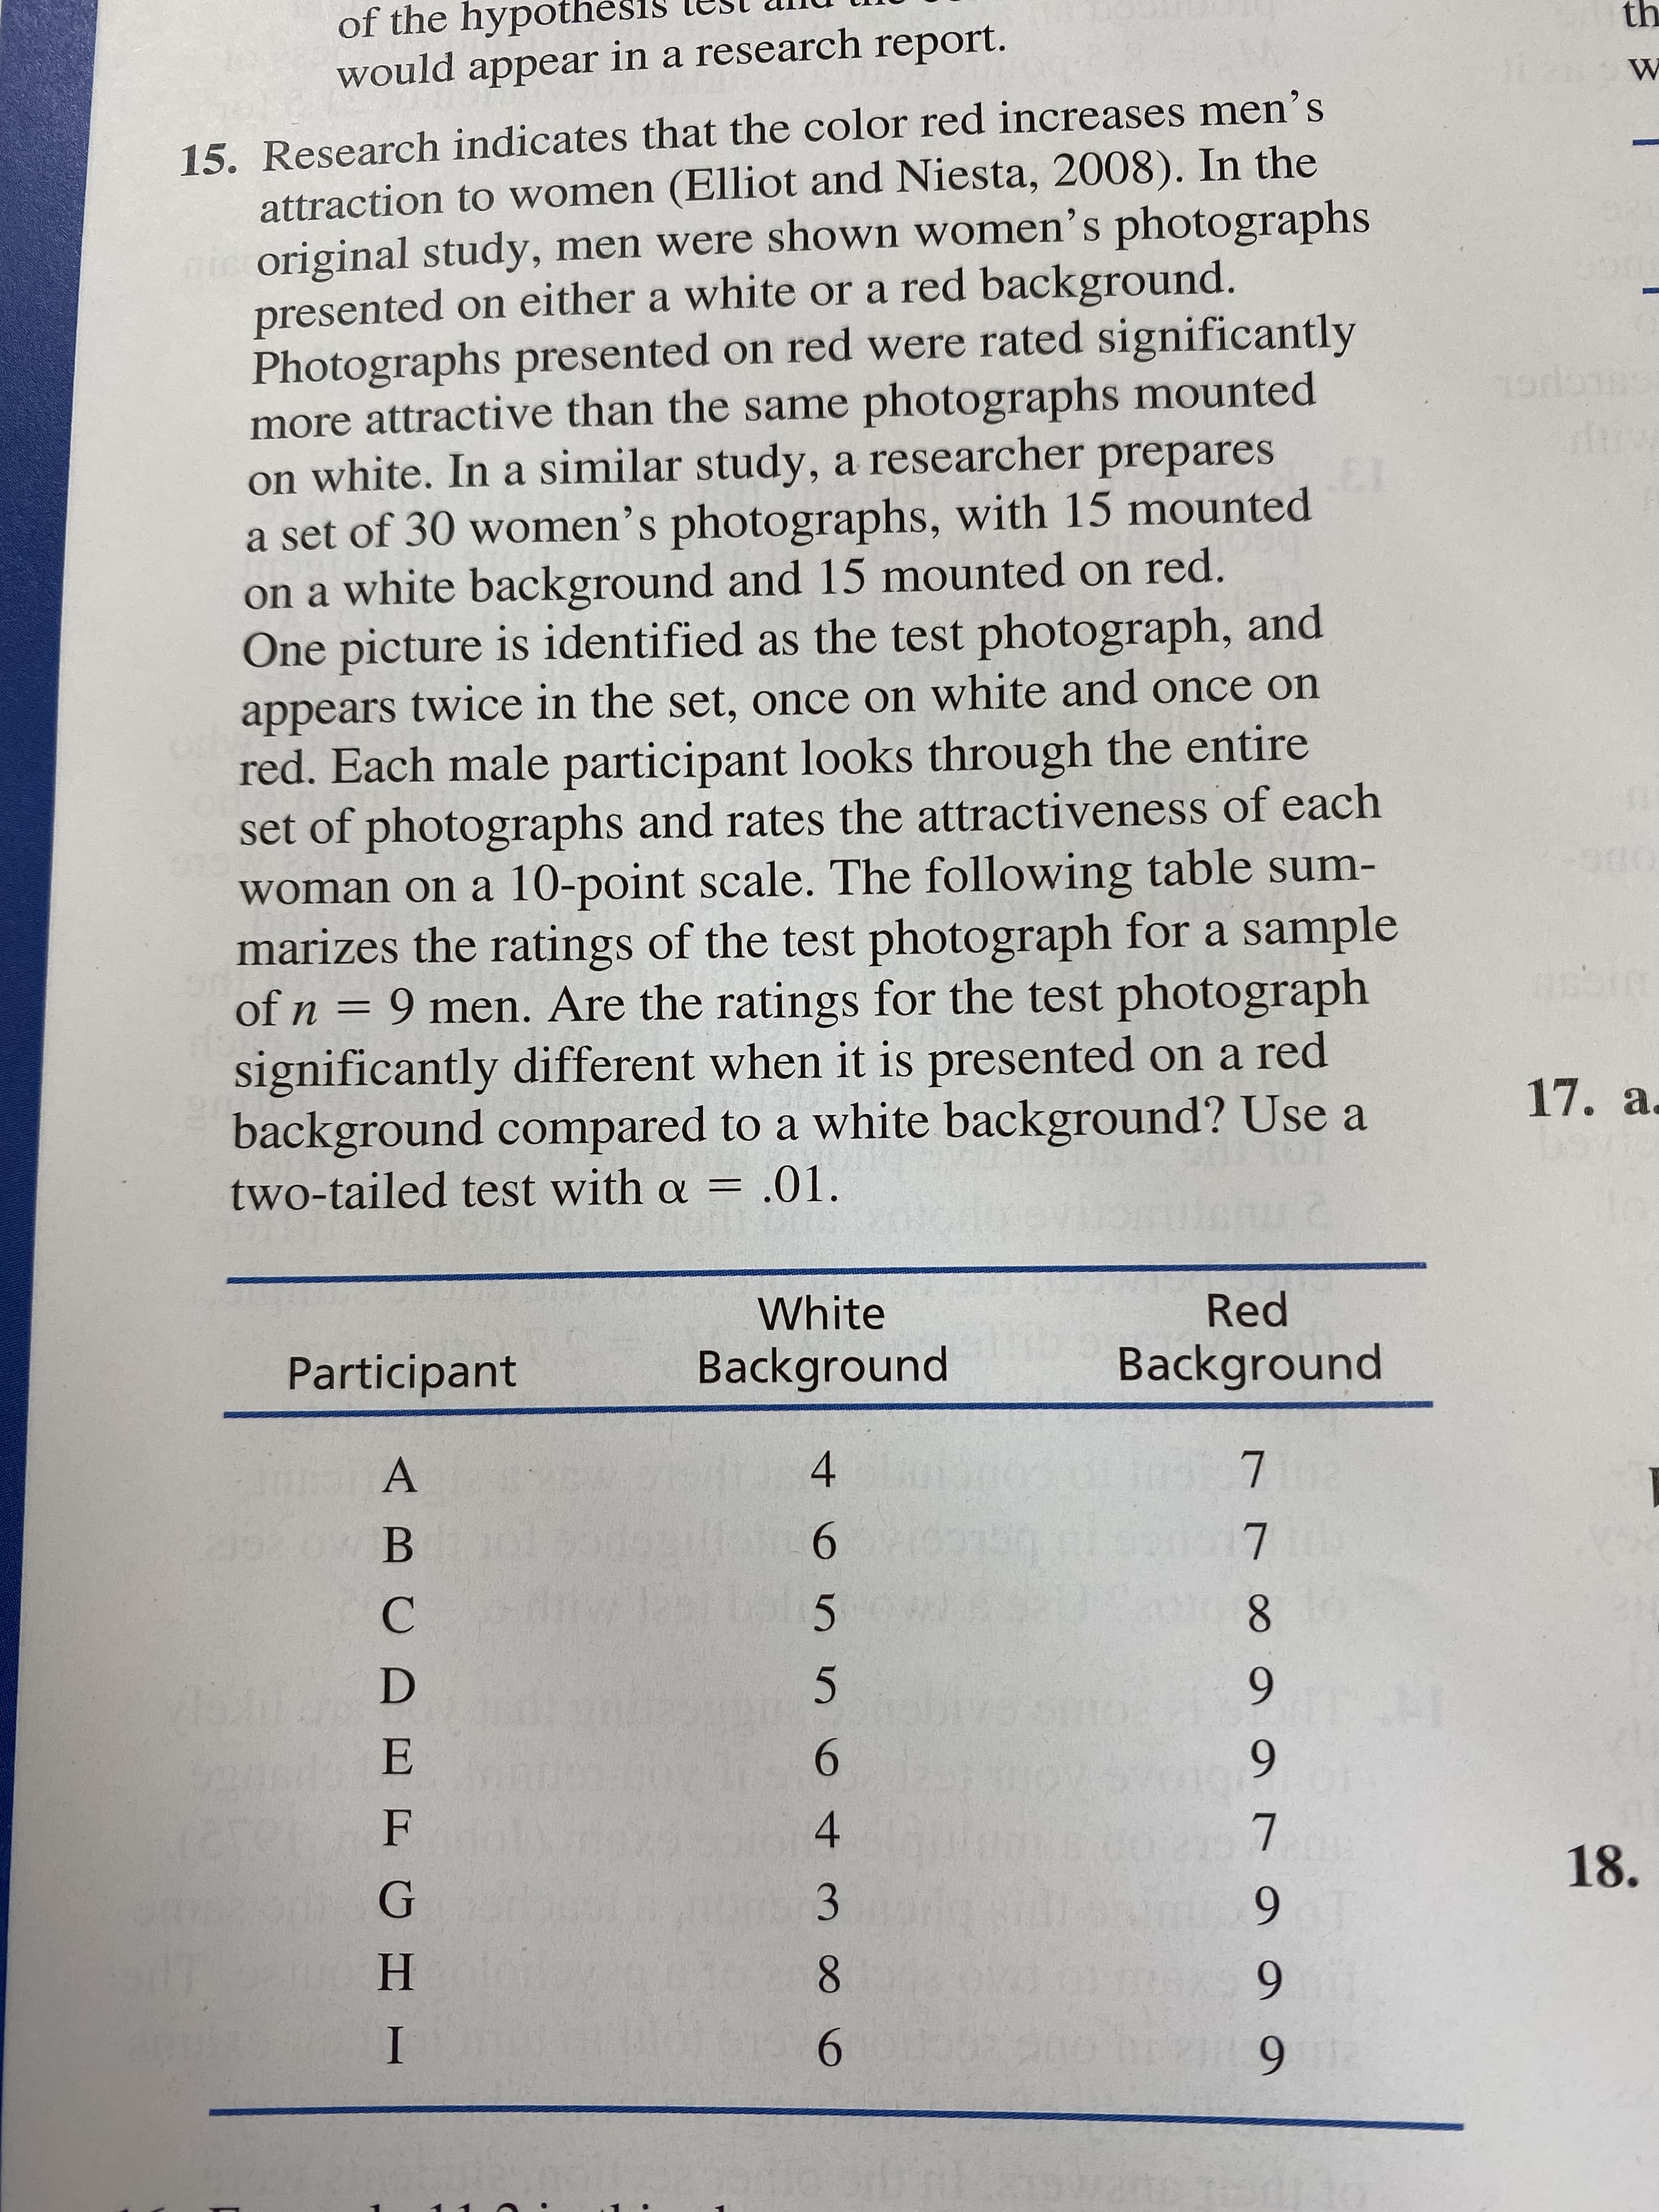 th
of the hypothesis
would appear in a research report.
112
W
15. Research indicates that the color red increases men's
attraction to women (Elliot and Niesta, 2008). In the
ntoriginal study, men were shown women's photographs
presented on either a white or a red background.
Photographs presented on red were rated significantly
more attractive than the same photographs mounted
on white. In a similar study, a researcher prepares
a set of 30 women's photographs, with 15 mounted
on a white background and 15 mounted on red.
One picture is identified as the test photograph, and
appears twice in the set, once on white and once on
red. Each male participant looks through the entire
set of photographs and rates the attractiveness of each
woman on a 10-point scale. The following table sum-
marizes the ratings of the test photograph for a sample
of n 9 men. Are the ratings for the test photograph
significantly different when it is presented on a red
background compared to a white background? Use a
two-tailed test with a = .01
S0ns
19doms
uw
ET
-900
sin
17. a
2
Red
White
Background
Background
Participant
7
4
A
6
bo5
7
В
308 0W B
8
C
9
D
E
F
4
7
18.
3
9
H
2msxs 9
789
I
6
